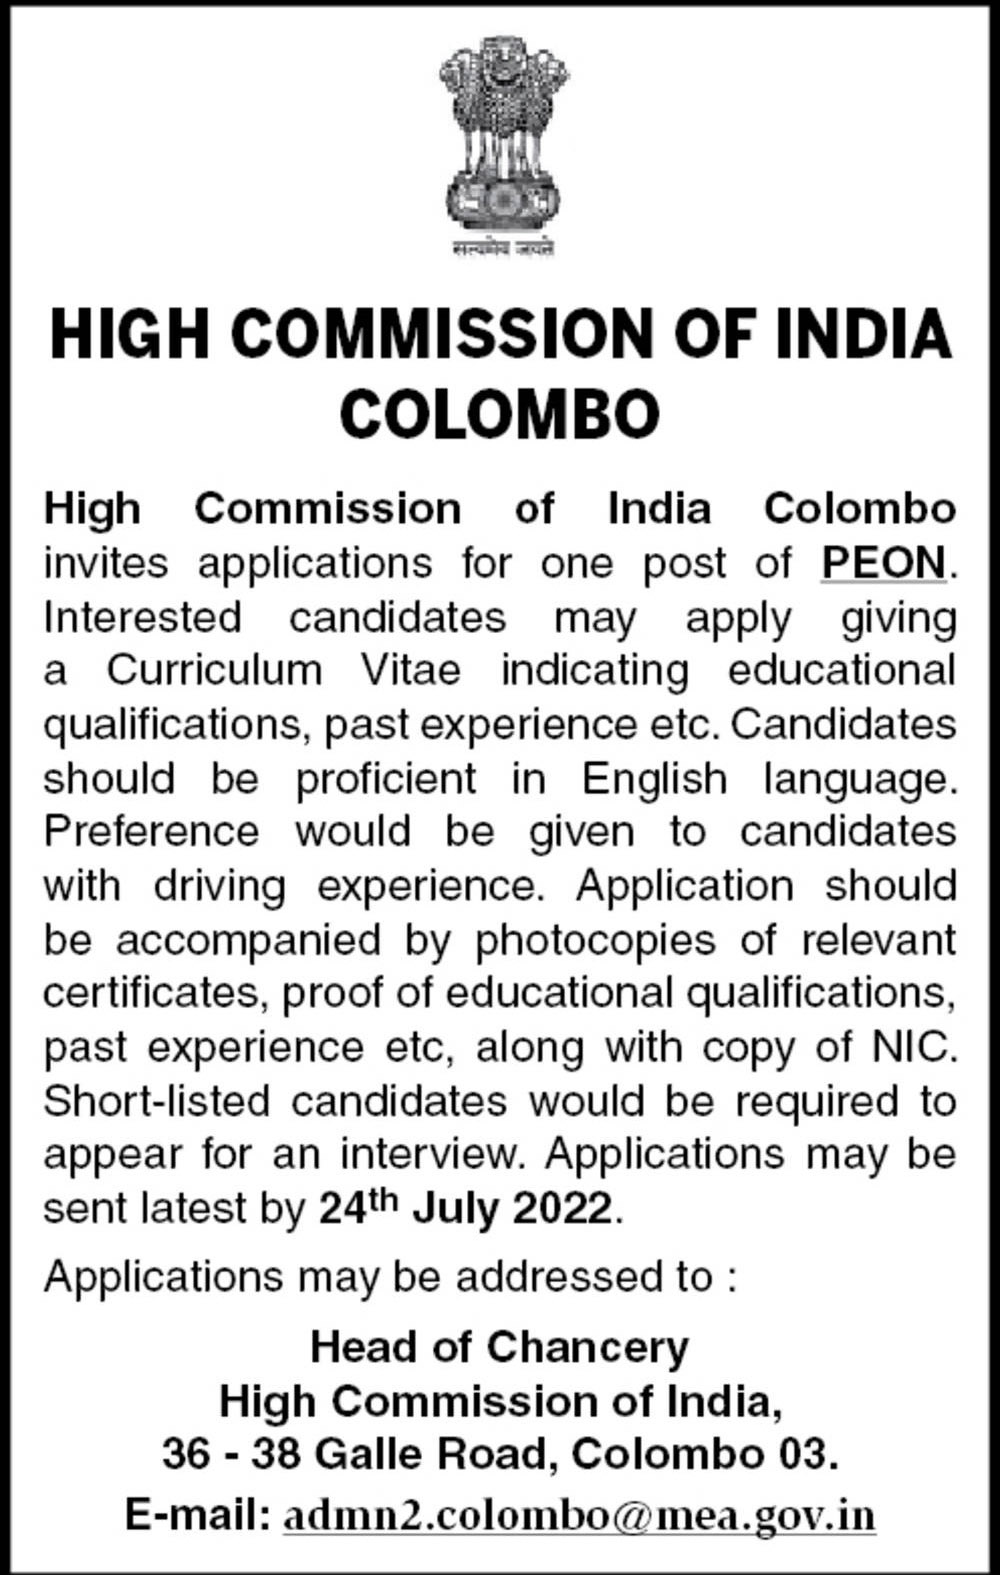 PEON - High Commission of India Colombo